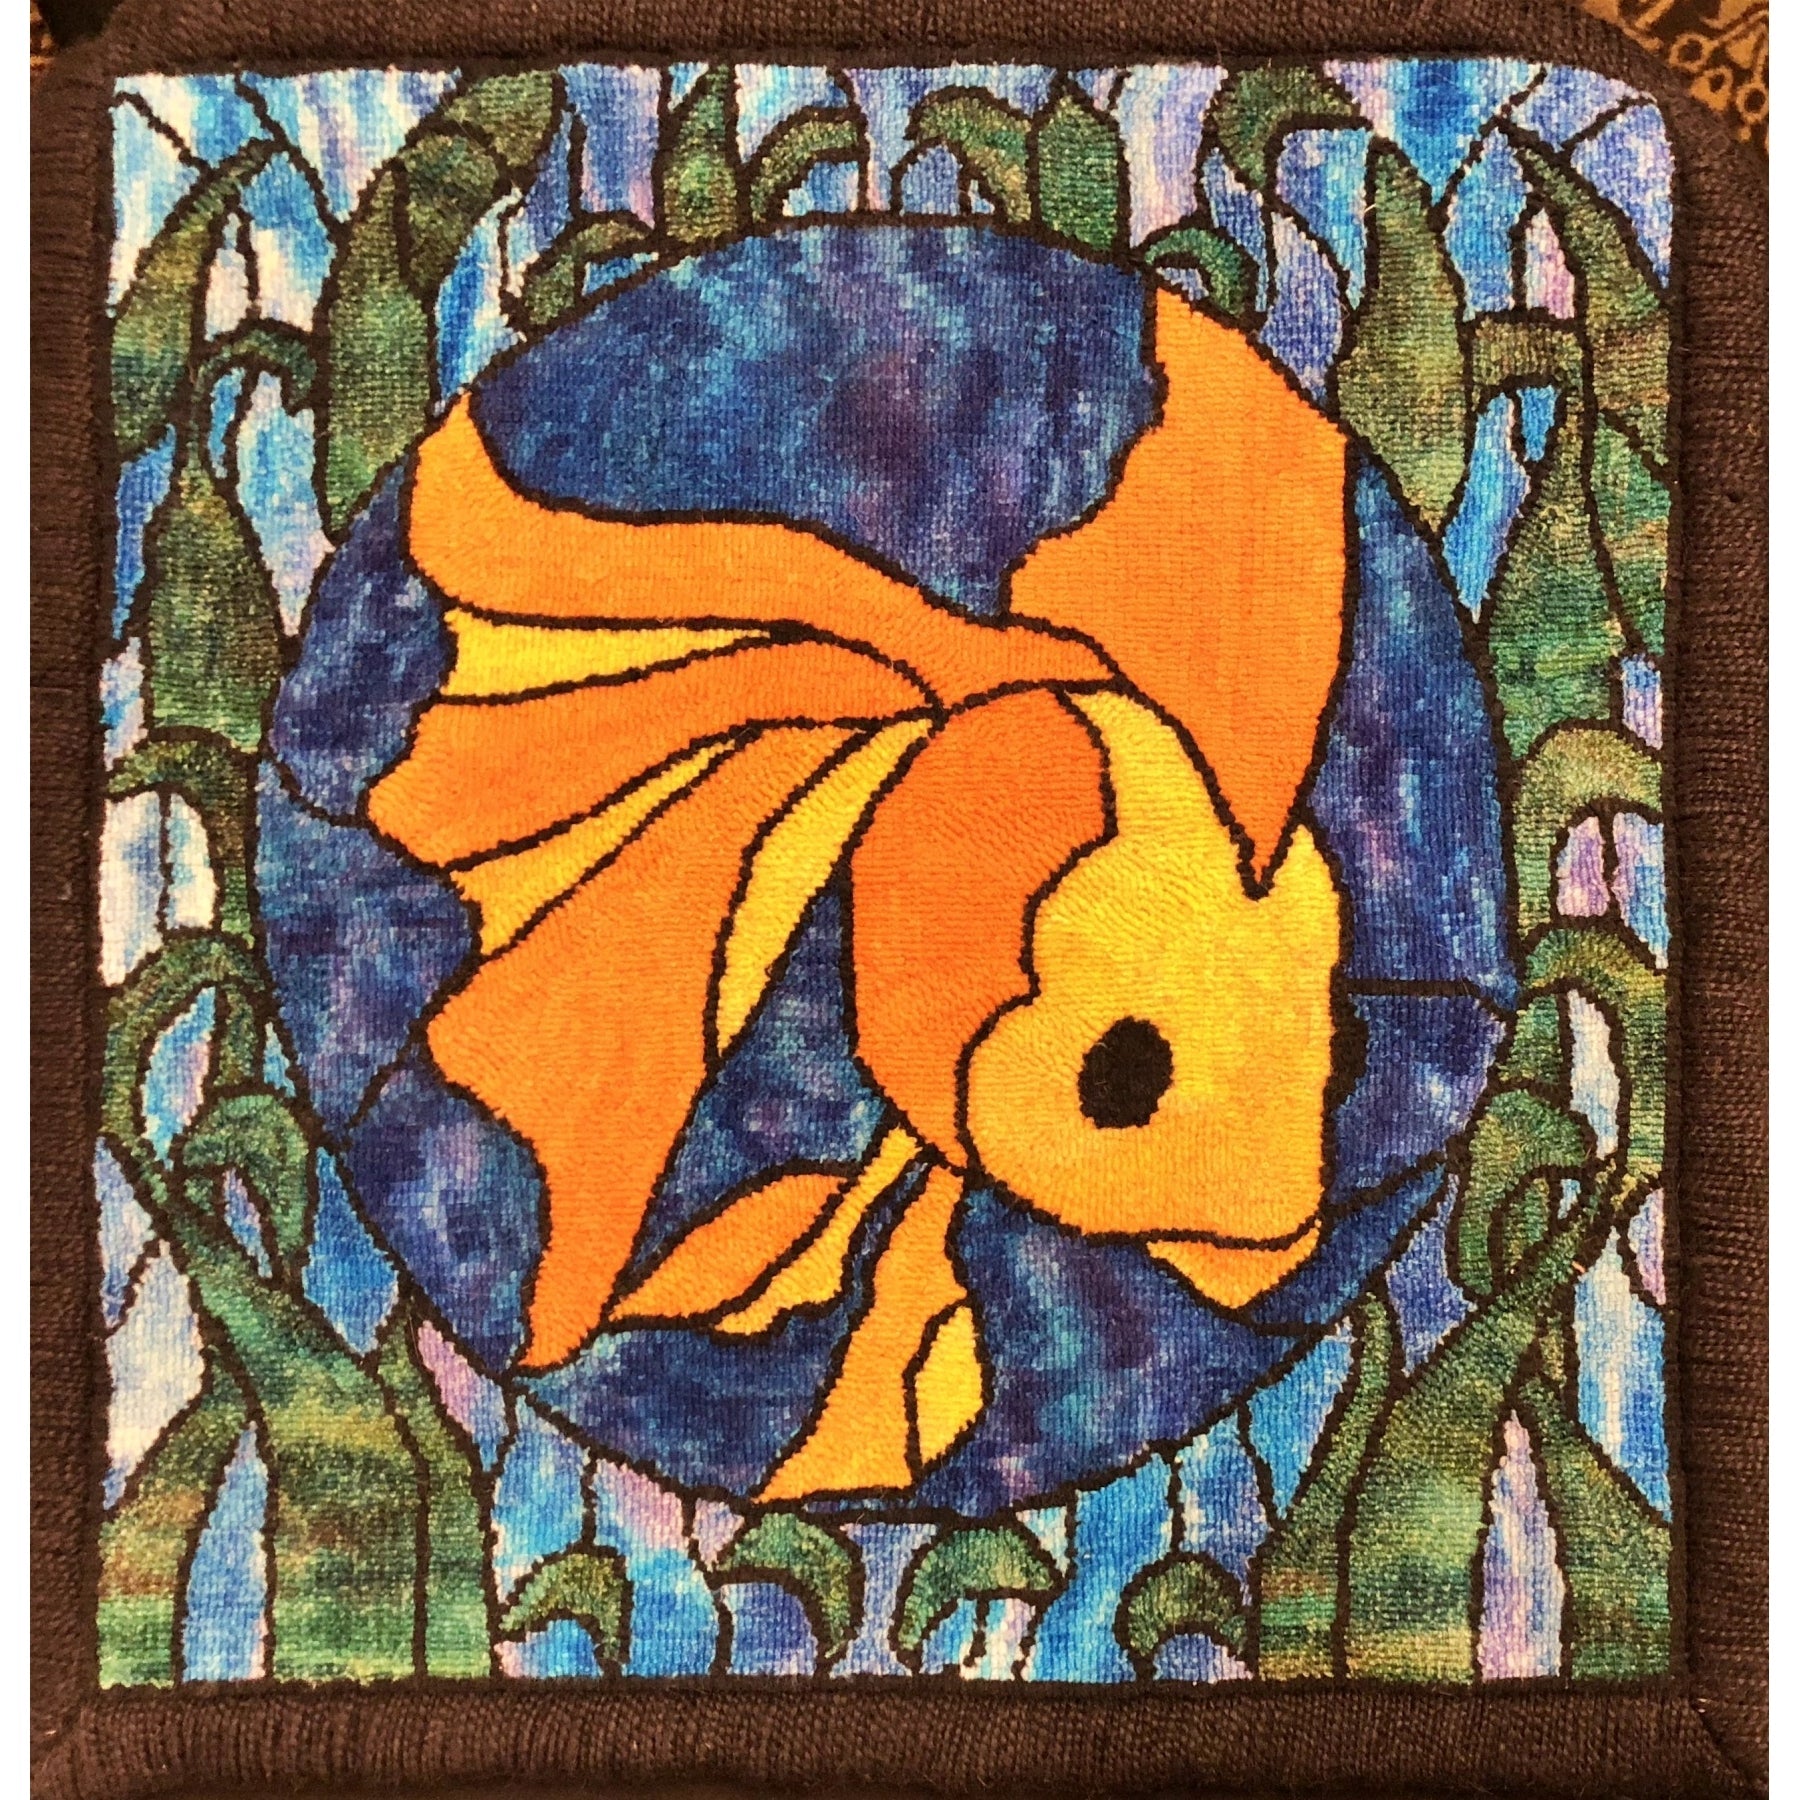 Stained Glass Fish, rug hooked by Sarah Miller